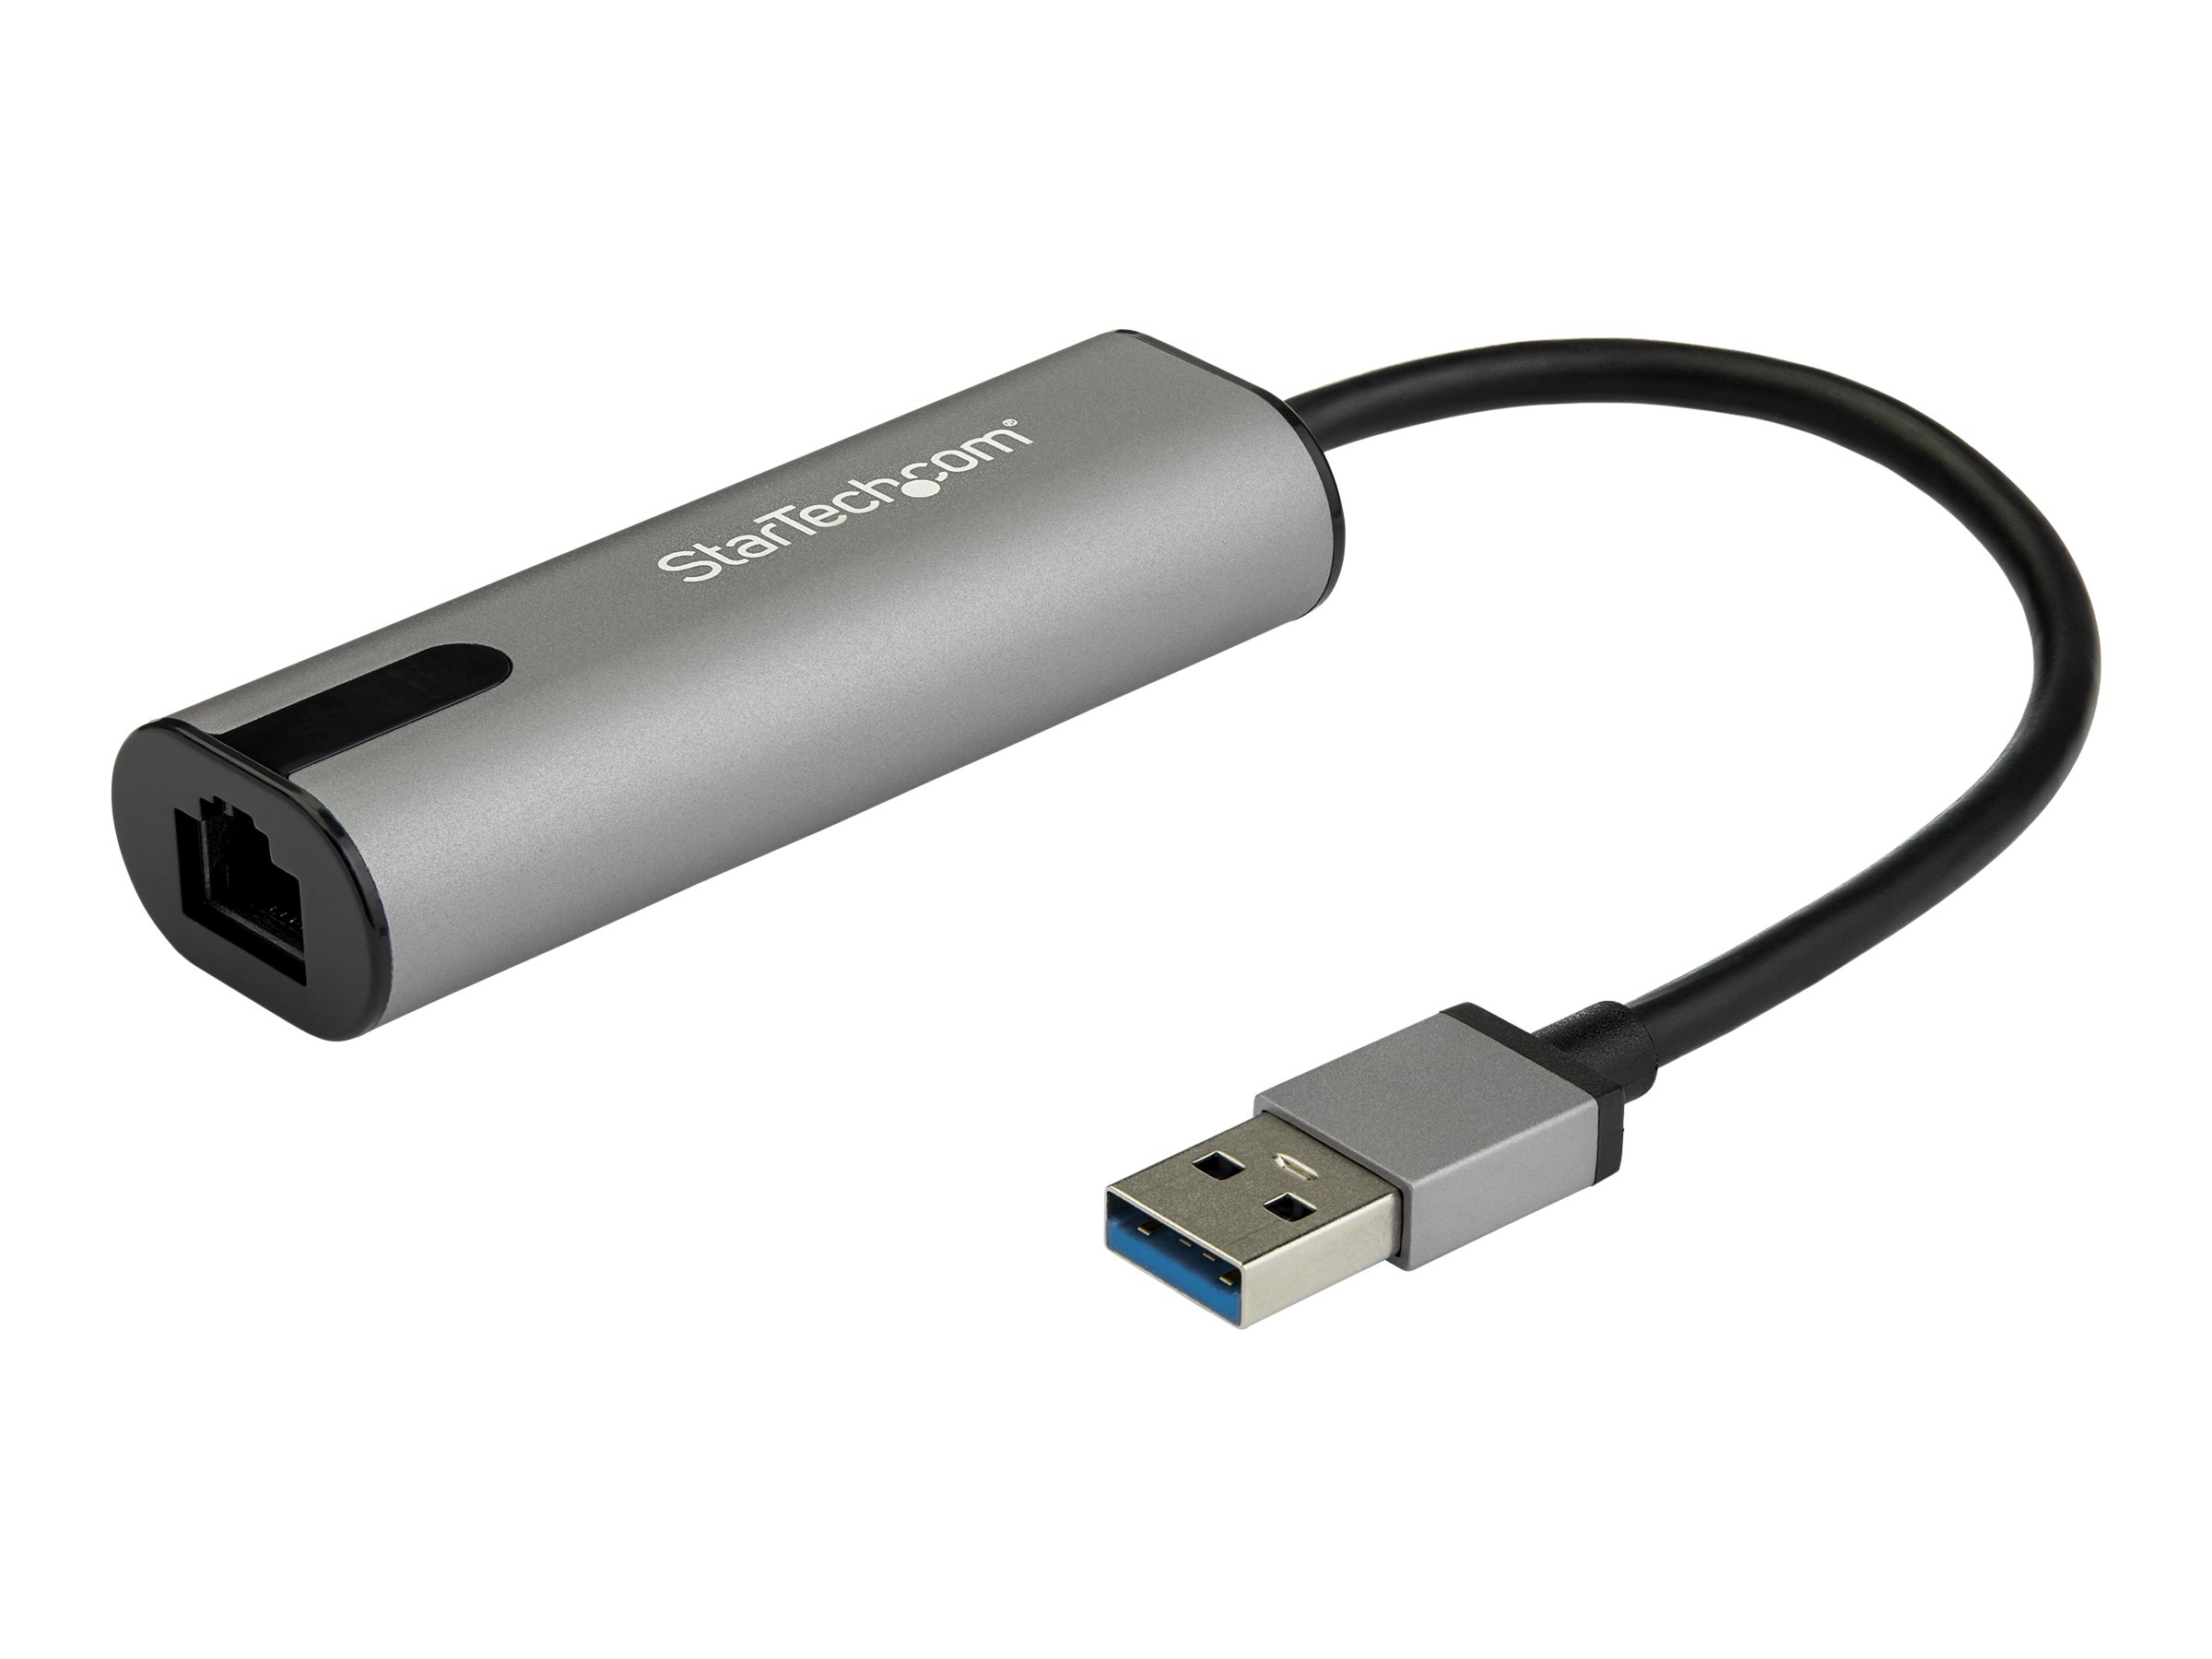 insekt Forskelsbehandling dråbe StarTech.com 2.5GbE USB A to Ethernet Adapter, NBASE-T NIC, USB 3.0 Type A  2.5 GbE /1 GbE Multi Speed Gigabit Network, USB 3.1 Laptop to RJ45/LAN,  Lenovo X1 Carbon, HP EliteBook/ ZBook 